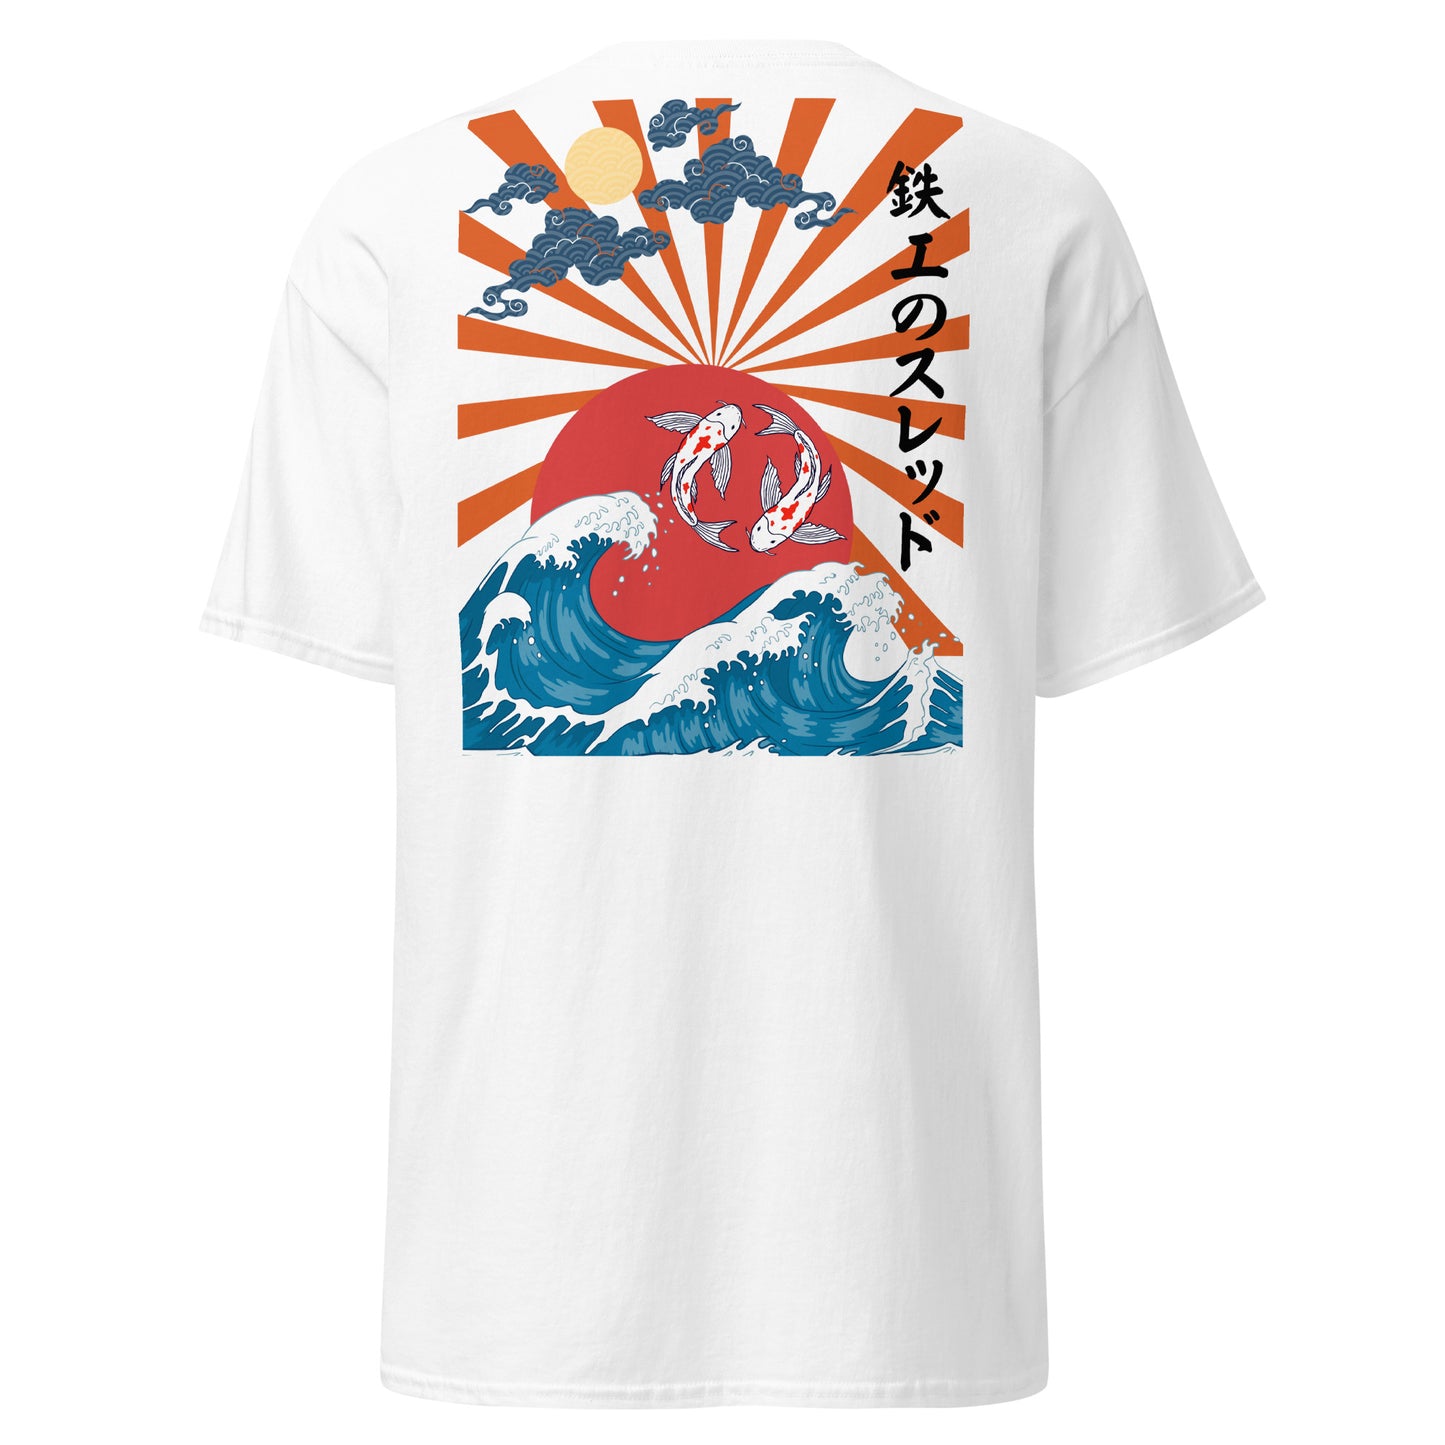 The Great Wave T-shirt